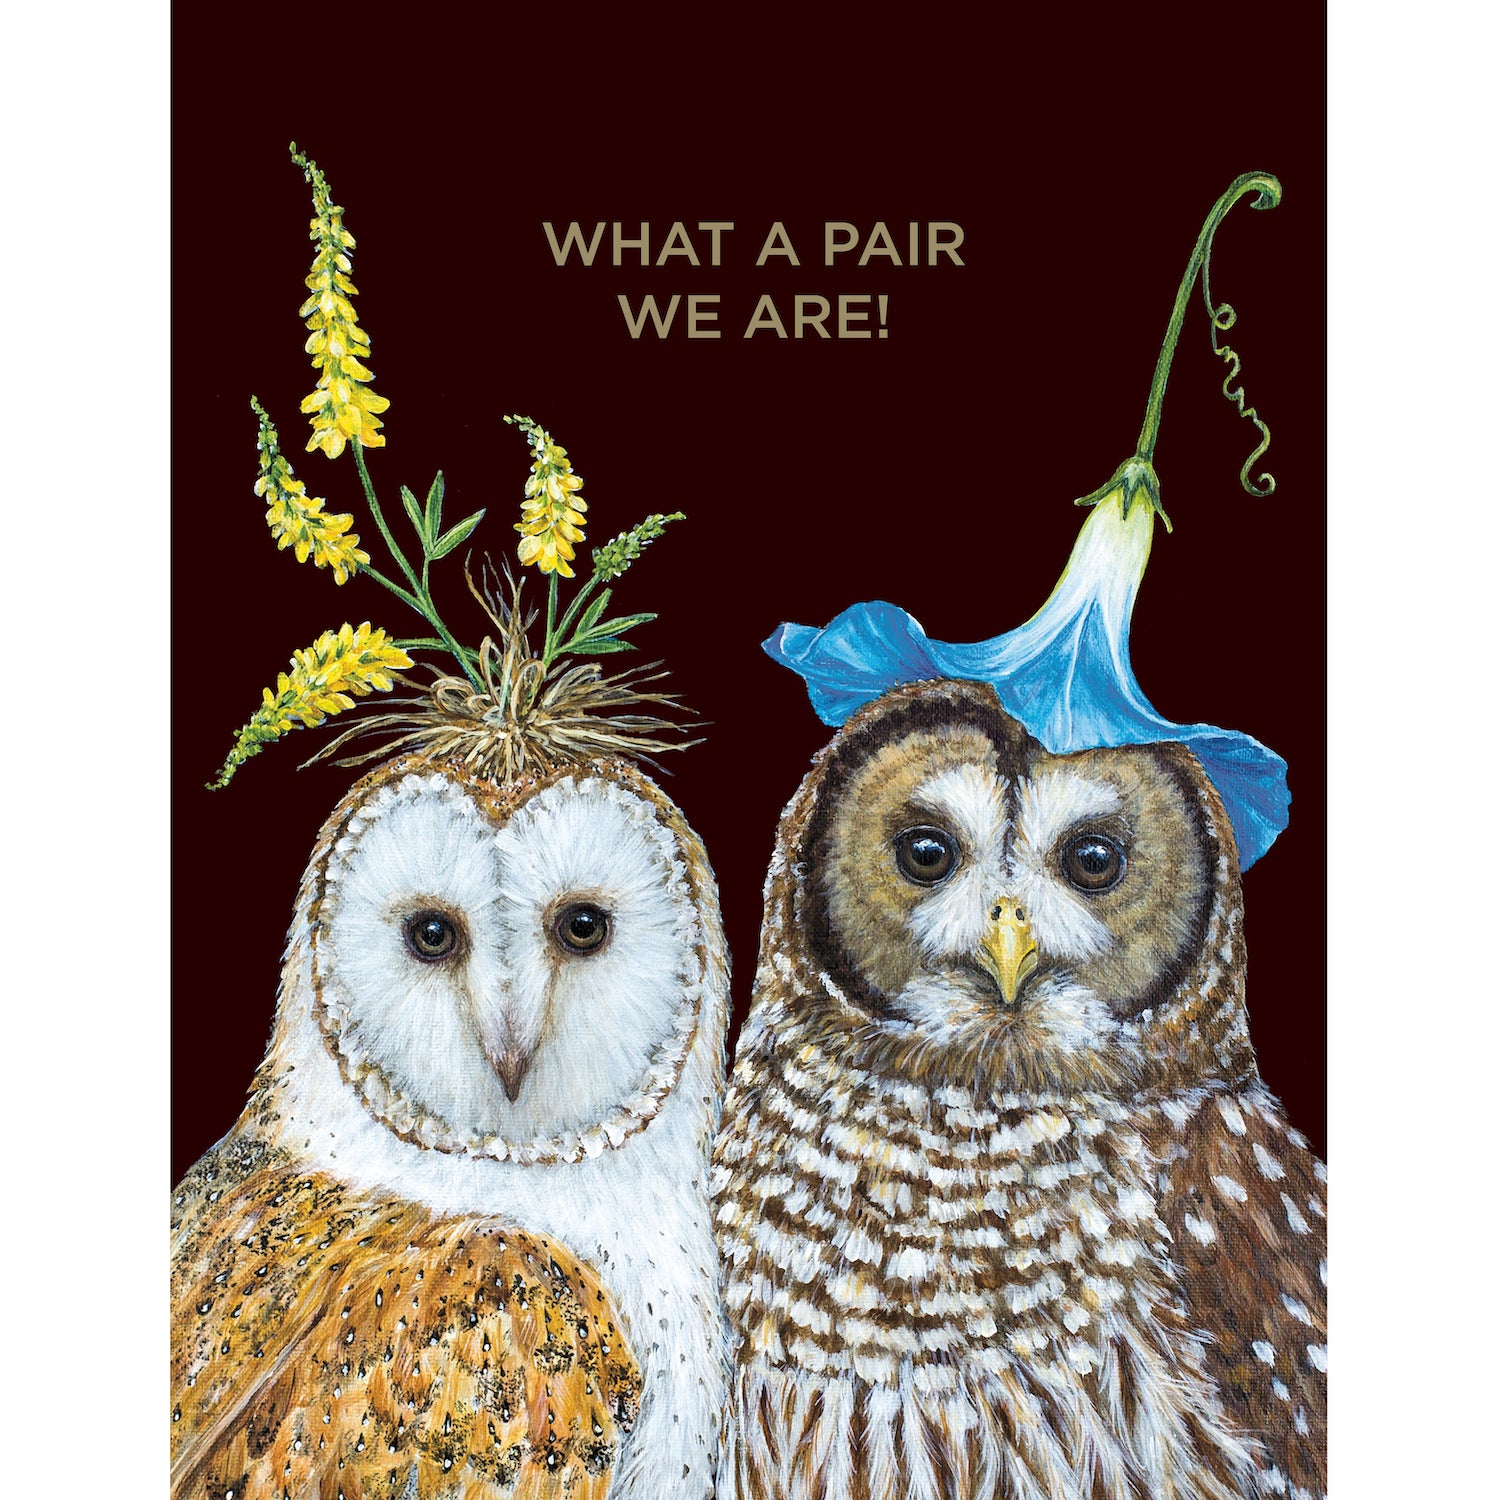 This special pair of Best Friend Owls Card greeting card features adorable Hester &amp; Cook Owls.